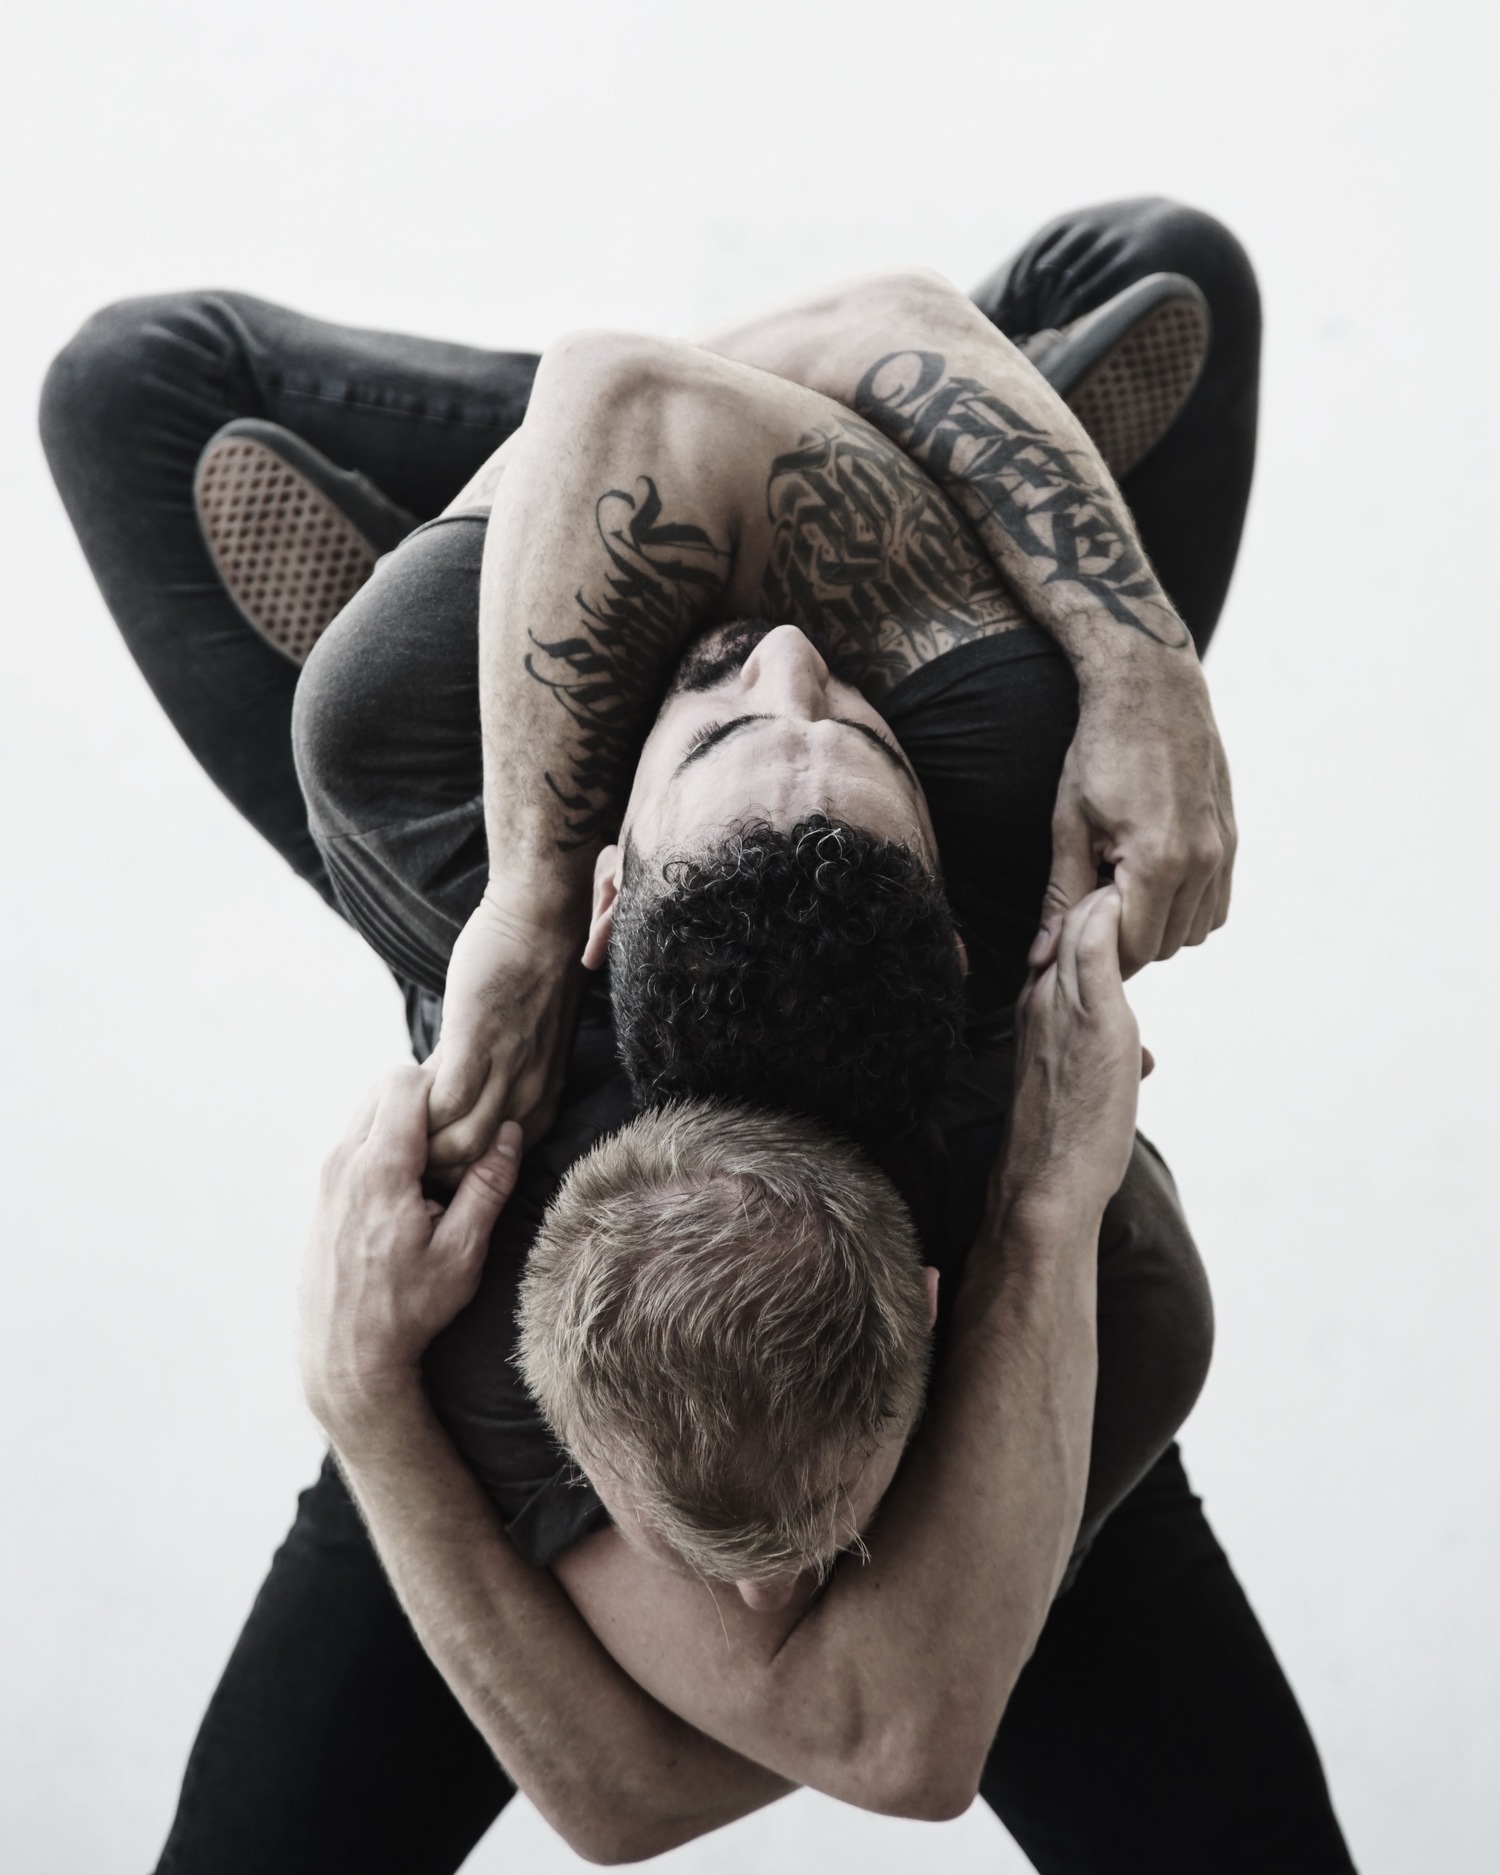 A FUSION OF CONTORTION, HIP-HOP, THREADING, BREAKDANCING AND CONTEMPORARY DANCE. Dance St. Louis kicks off its 53rd season with an arousing presentation of Wewolf, the LA-based company of award-winning international artists James Gregg and RubberLegz (aka Rauf Yasit). 